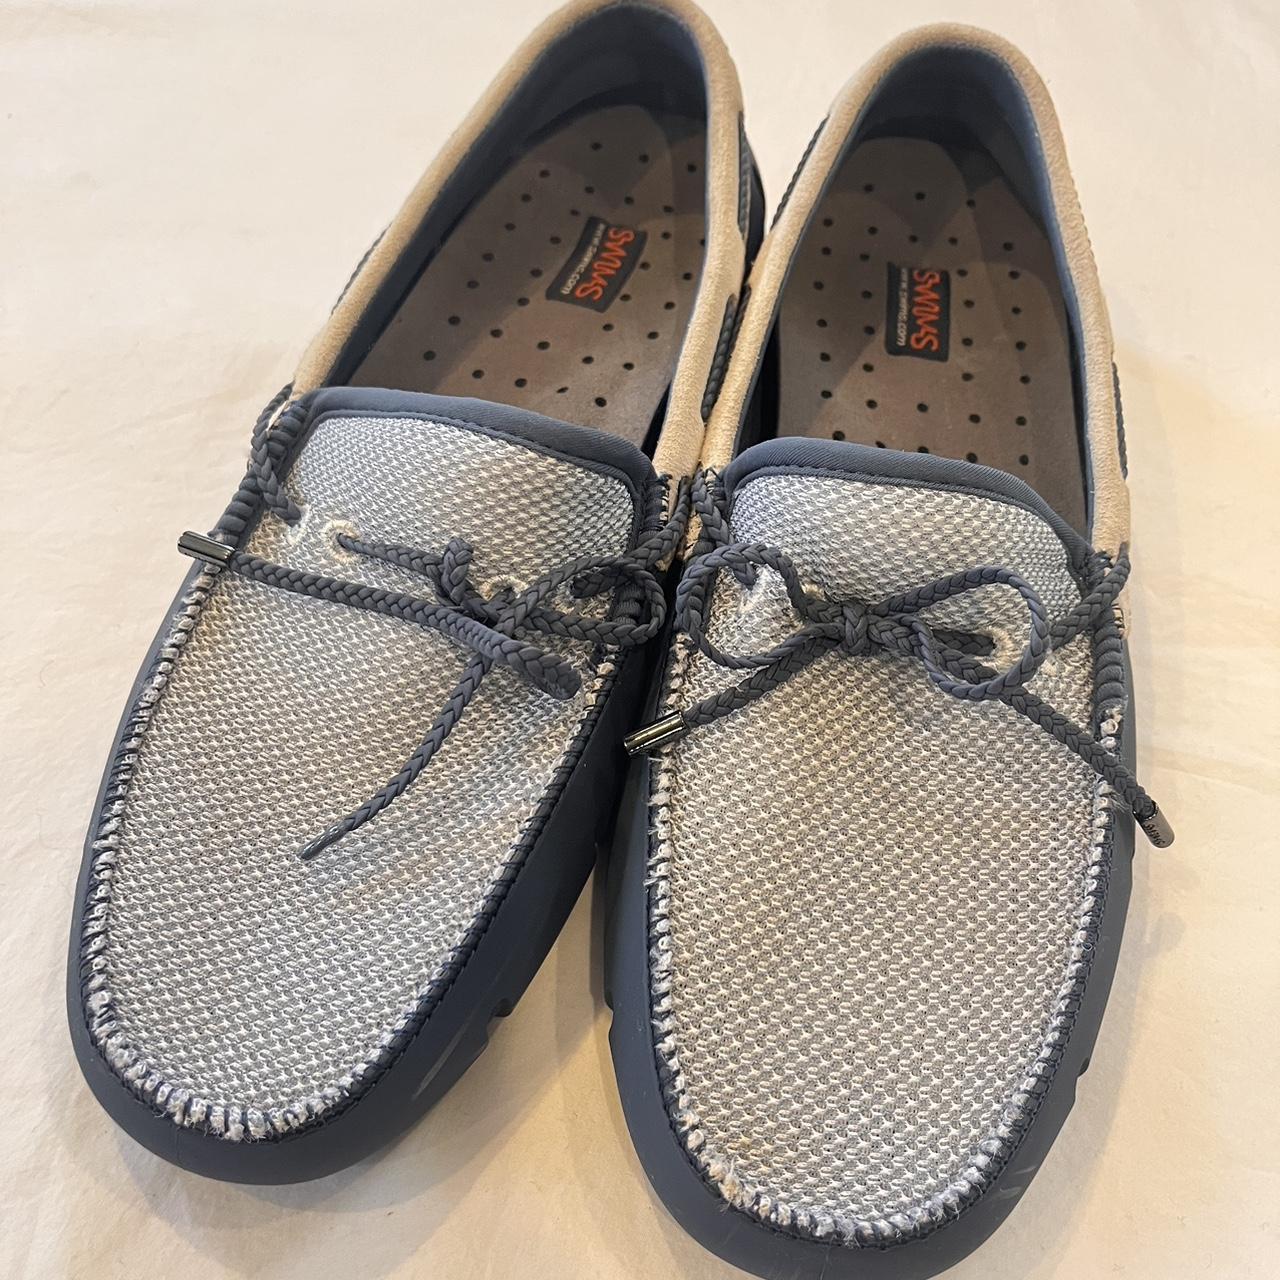 Swims Men's Blue and White Loafers | Depop